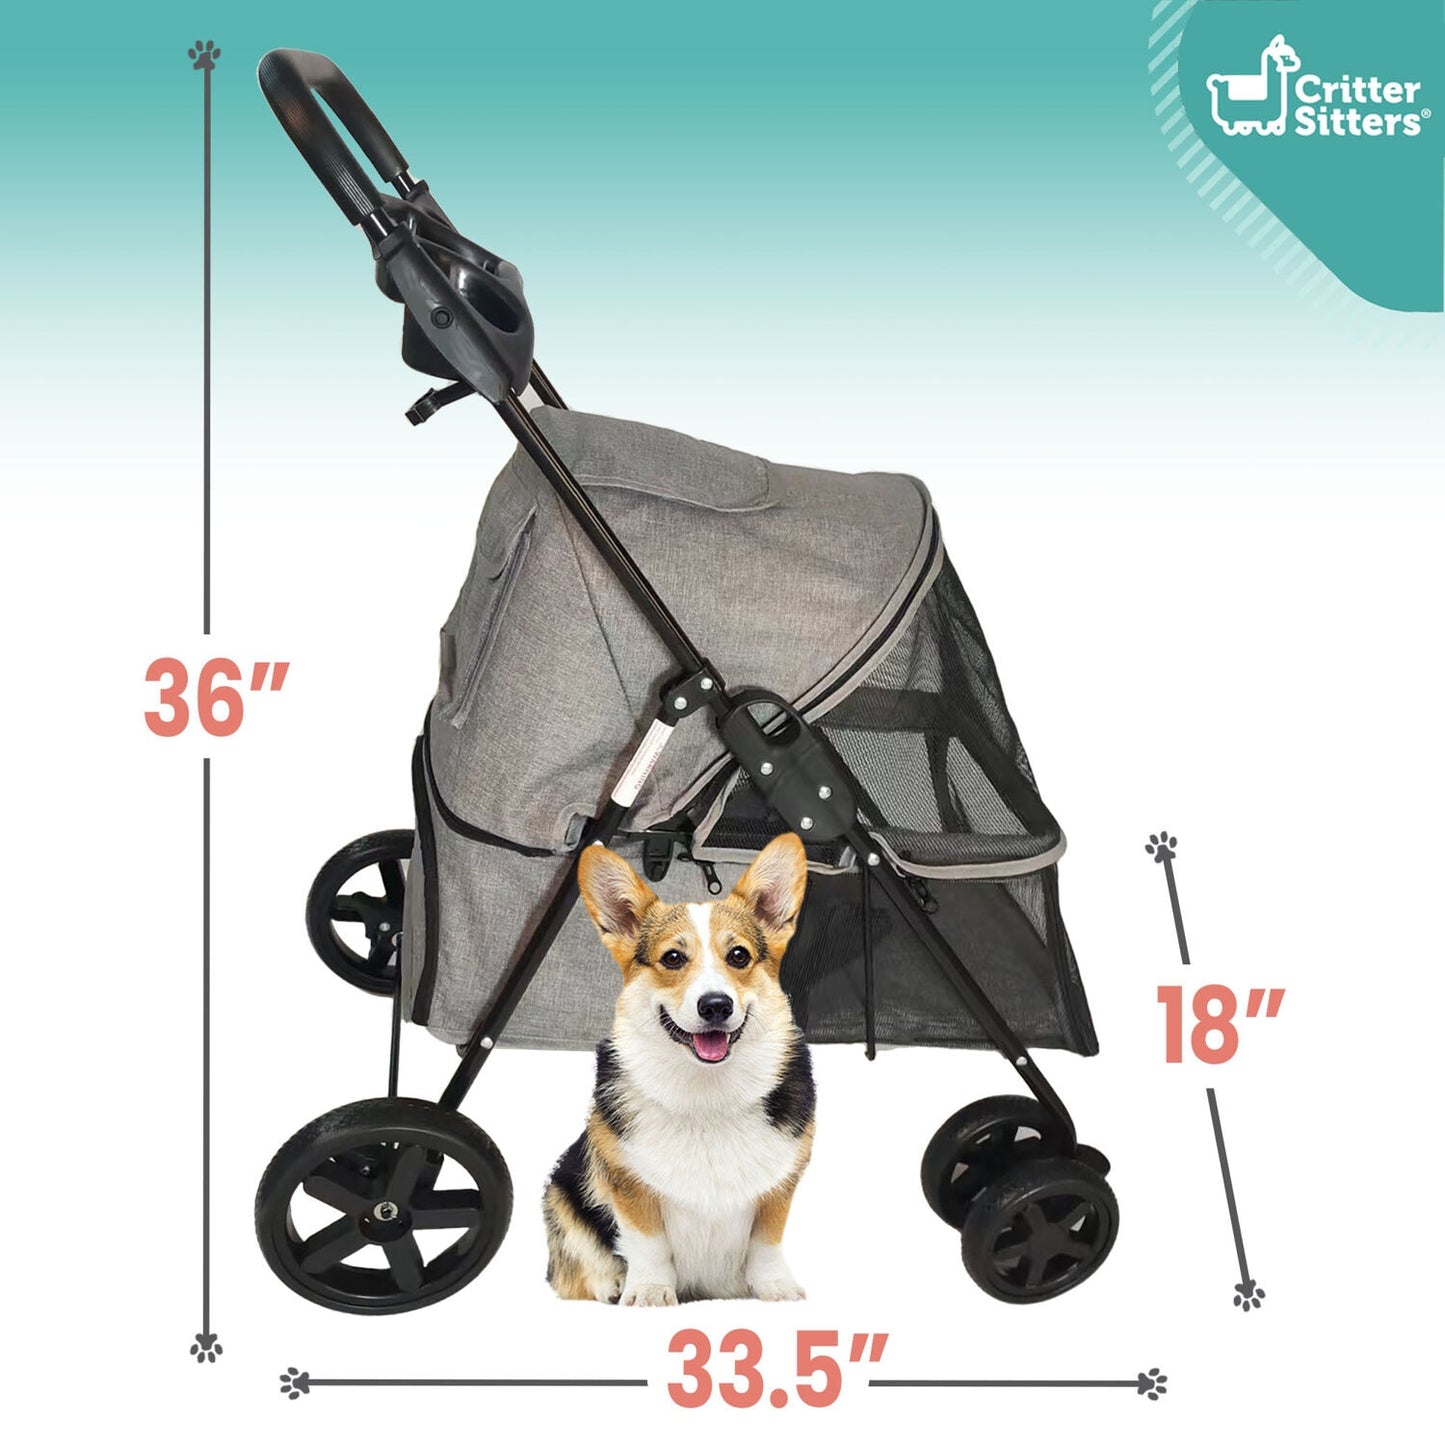 Foldable Pet Stroller for Small Dogs/Cats with Breathable Scratch Resistant Mesh Windows | Cup Holders | Storage Pockets | - scottsoutlet